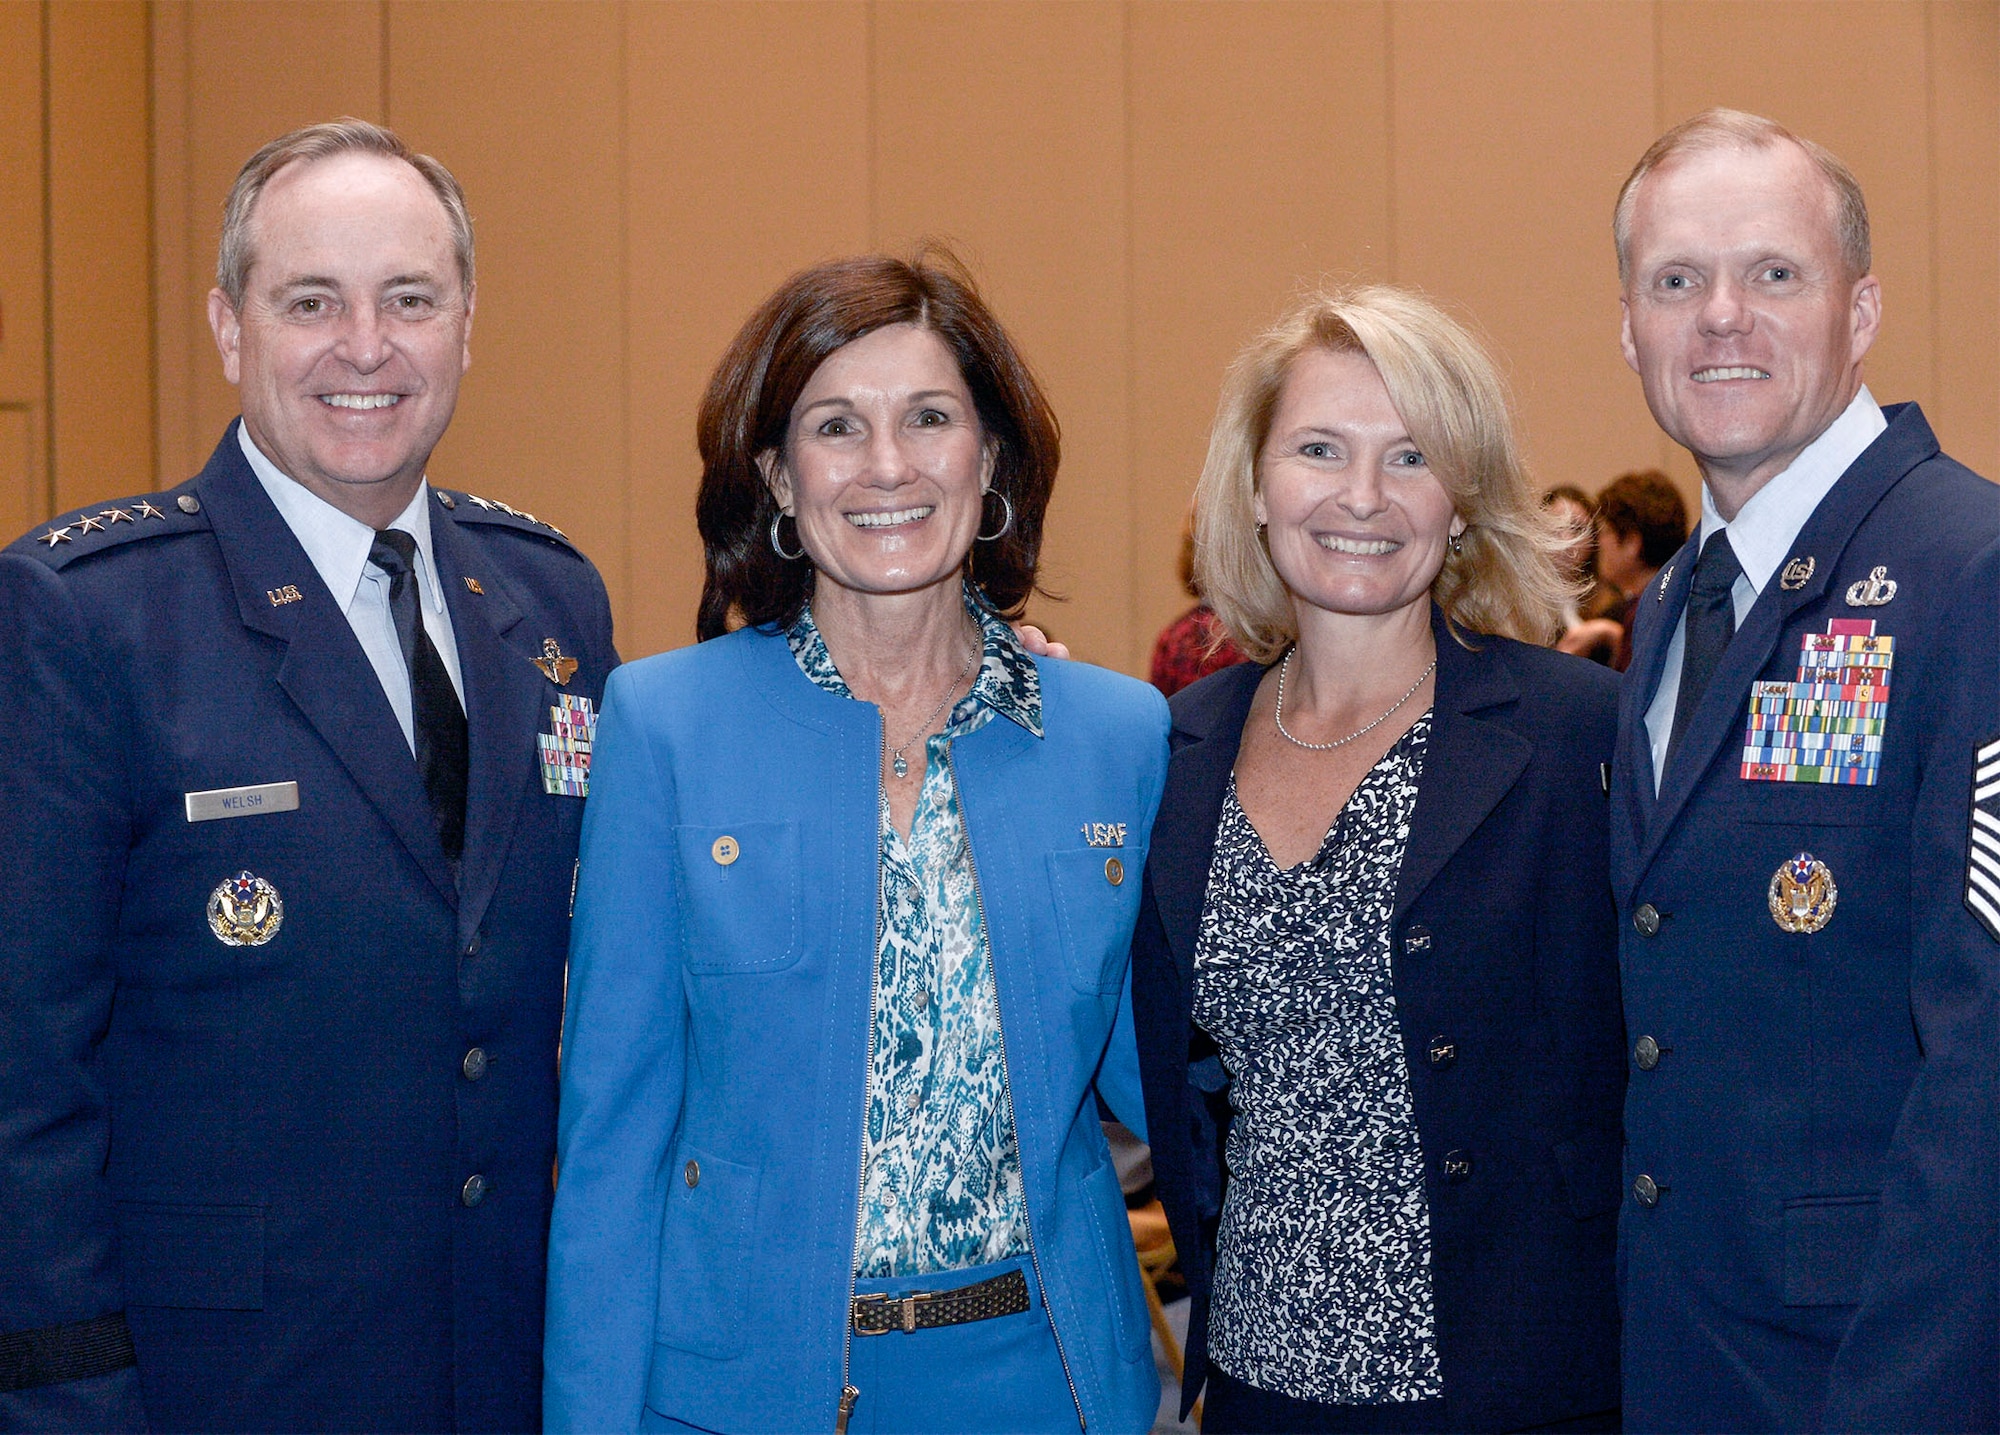 Air Force Chief of Staff Gen. Mark A. Welsh III, (left to right) his wife Betty, Athena Cody and Chief Master Sgt. of the Air Force James A. Cody pose for a photo at the Air Force Association's 2013 Air & Space Conference and Technology Exposition Sept.16, 2013, in Washington D.C. Betty and Athena addressed Family Spouse Forum attendees concerning unique issues facing military spouses and family members such as multiple deployments, child care and education. (U.S. Air Force photo/Michael J. Pausic)